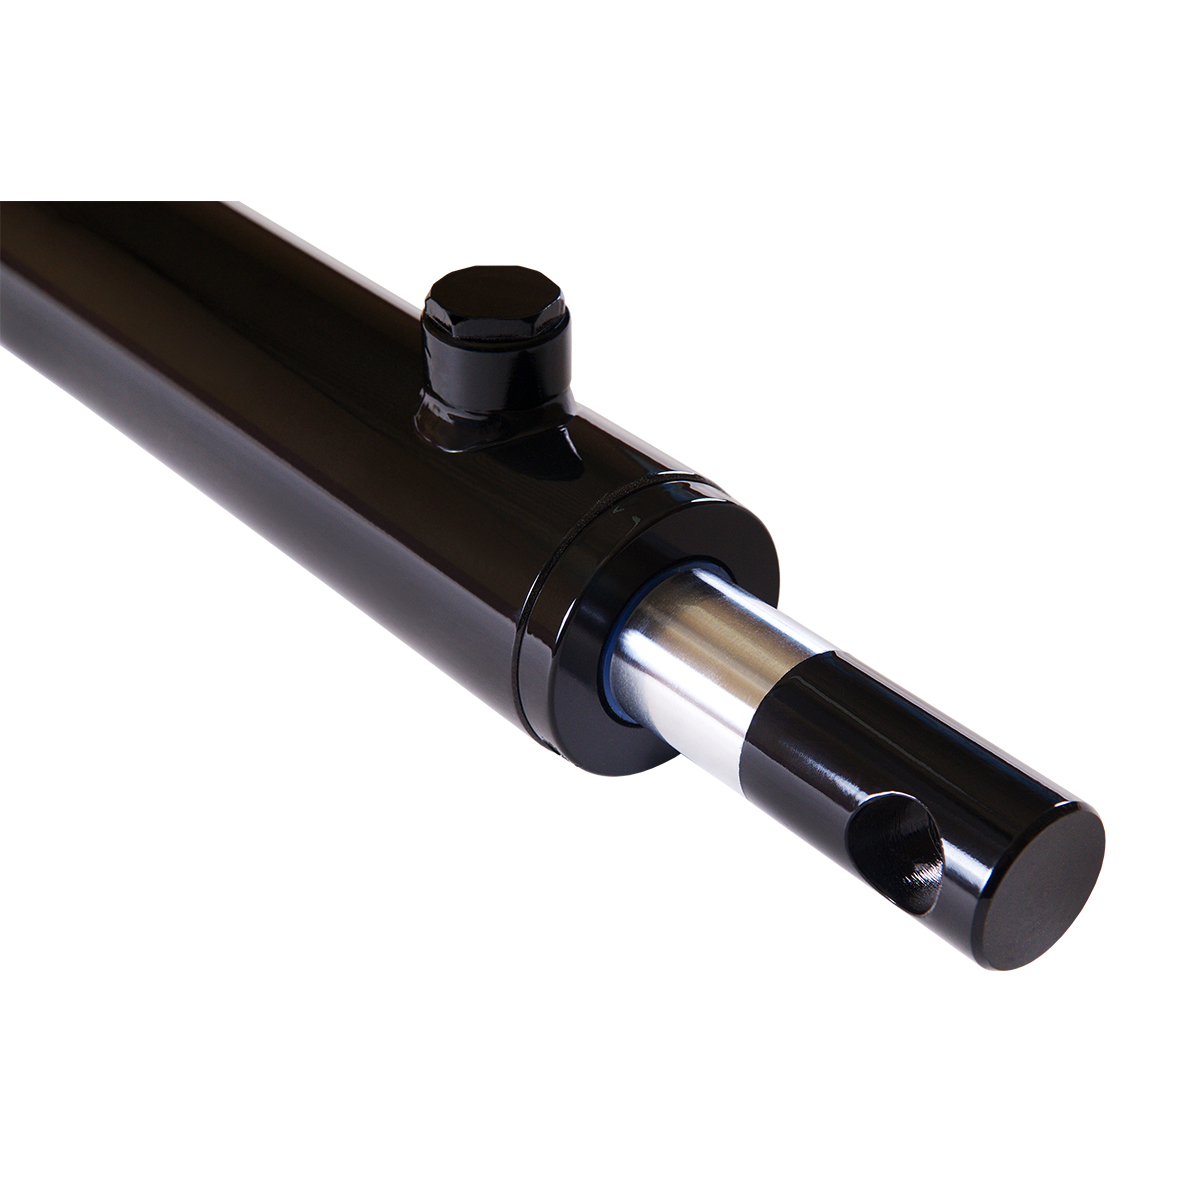 2 bore x 36 stroke hydraulic cylinder, welded pin eye double acting cylinder | Magister Hydraulics